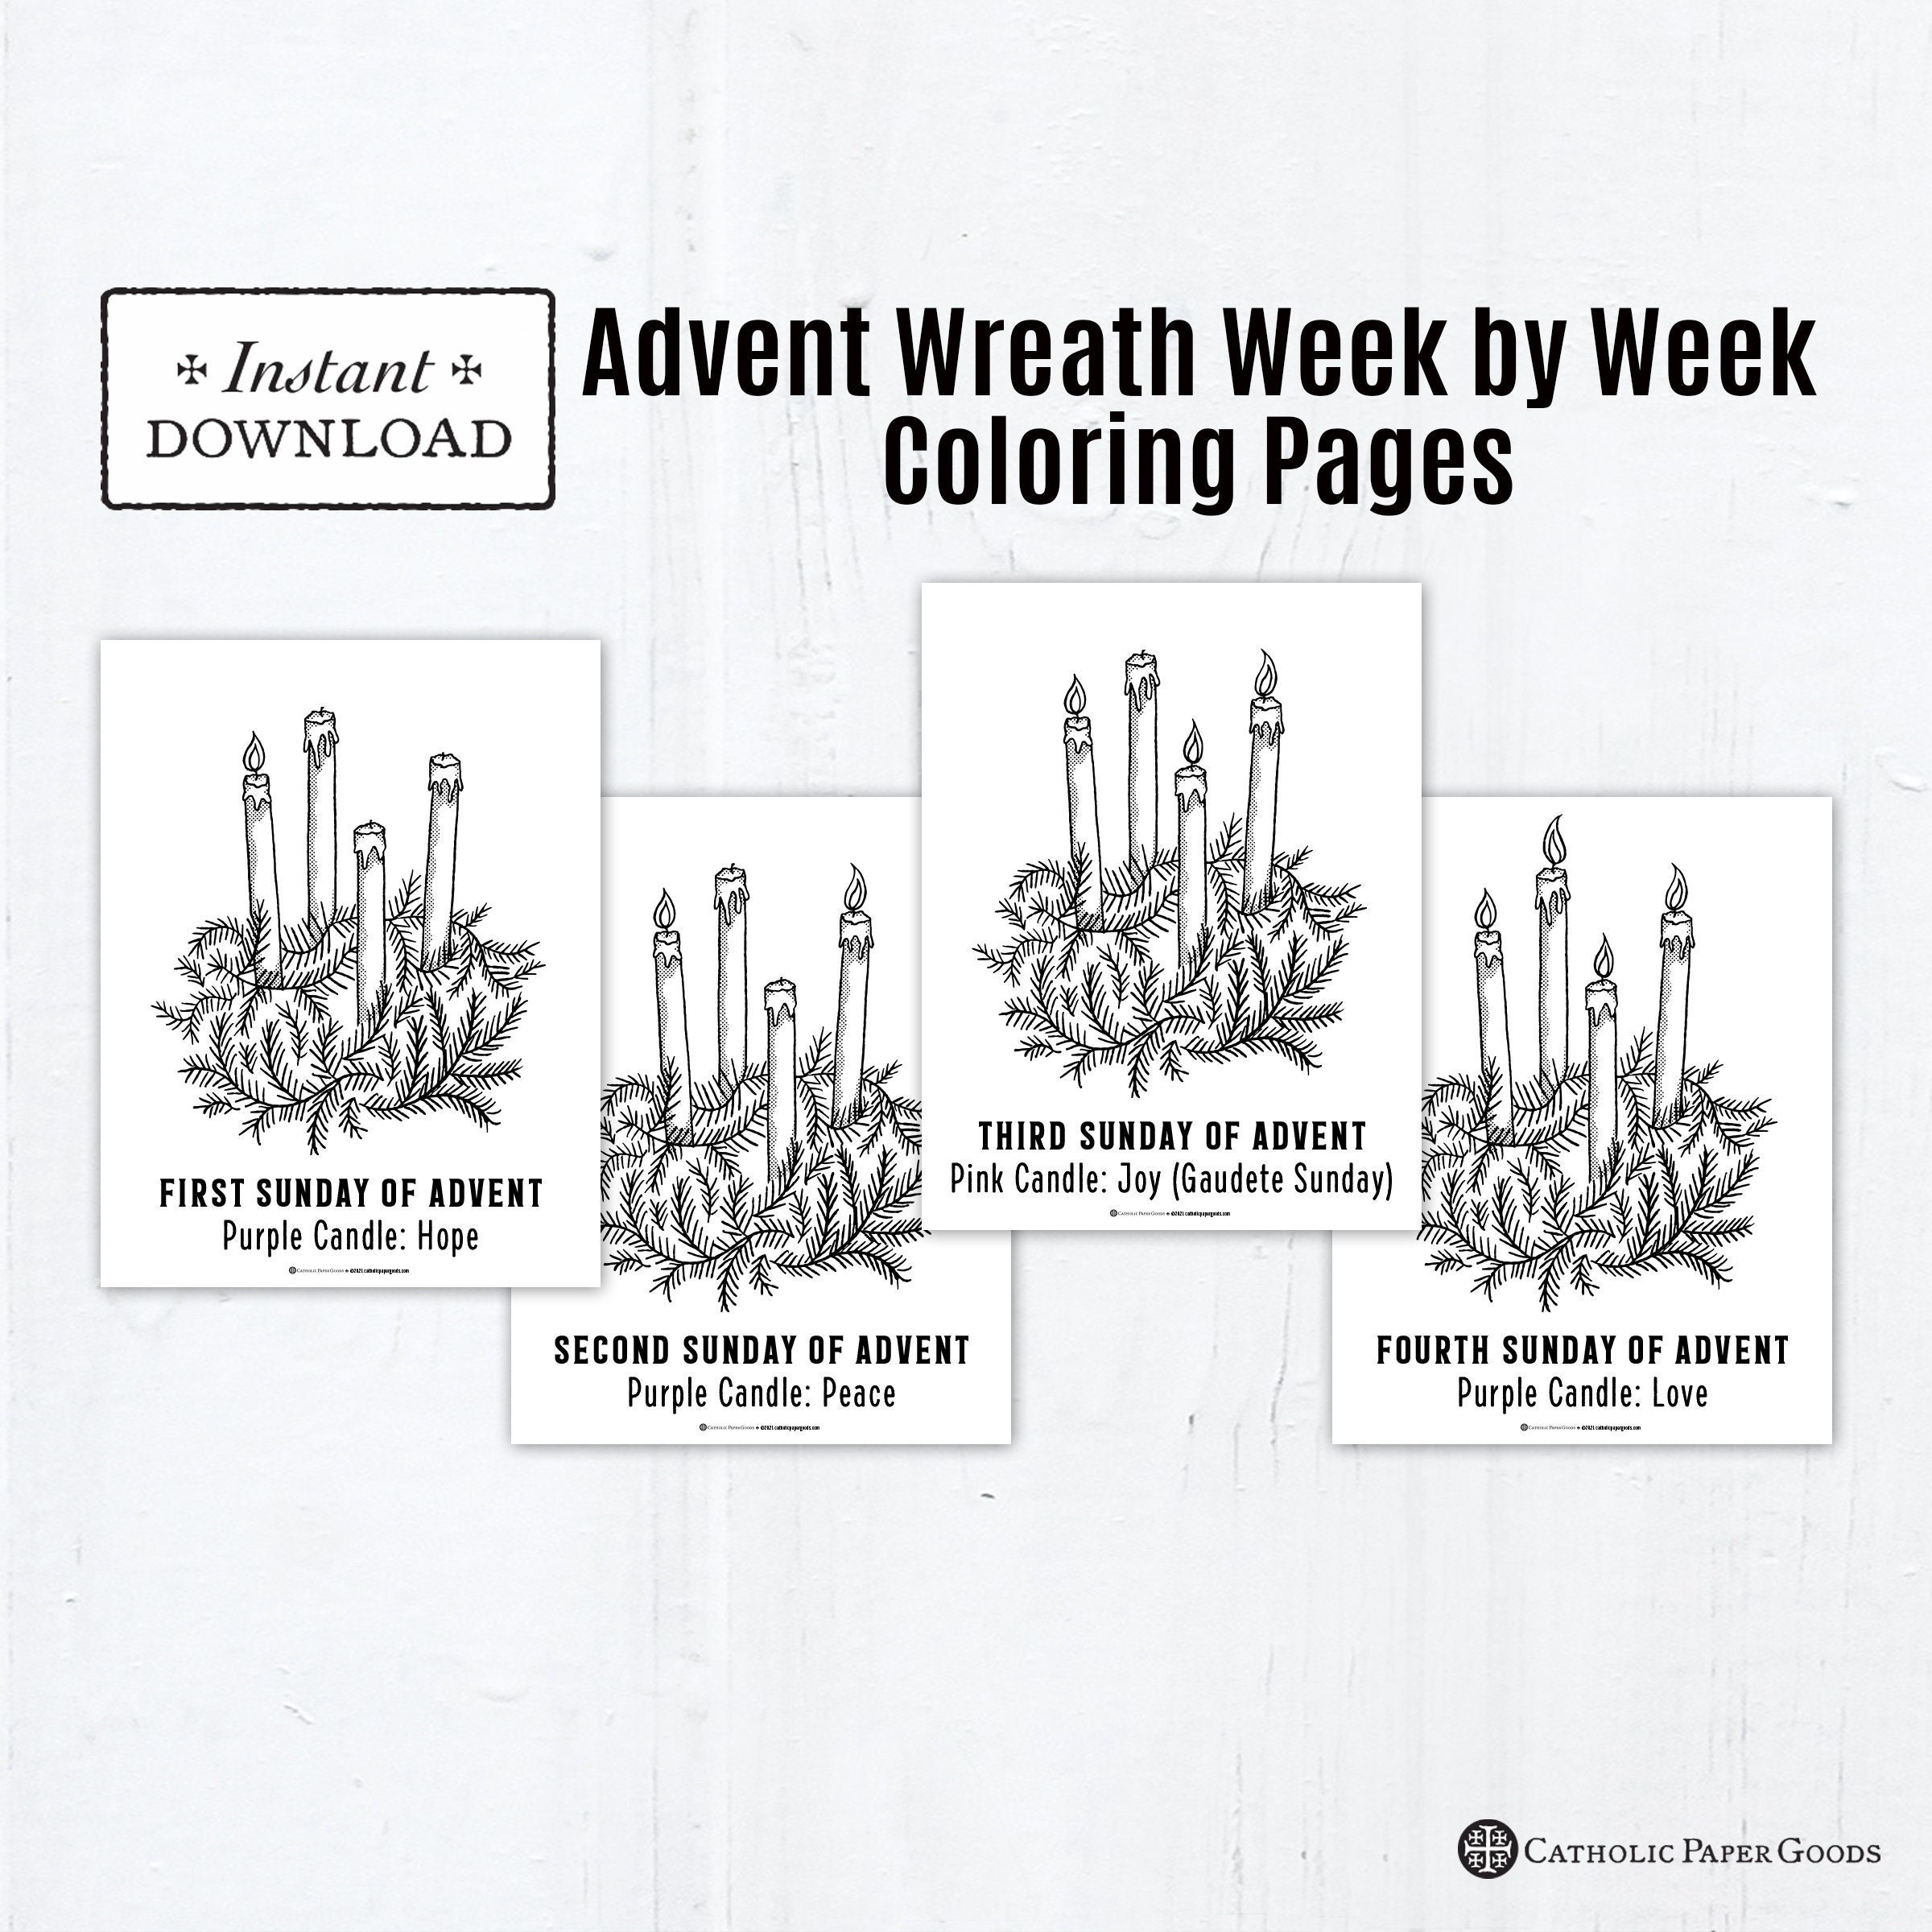 Advent wreath coloring pages by week advent coloring page bundle digital printable catholic coloring page advent wreath gaudete sunday